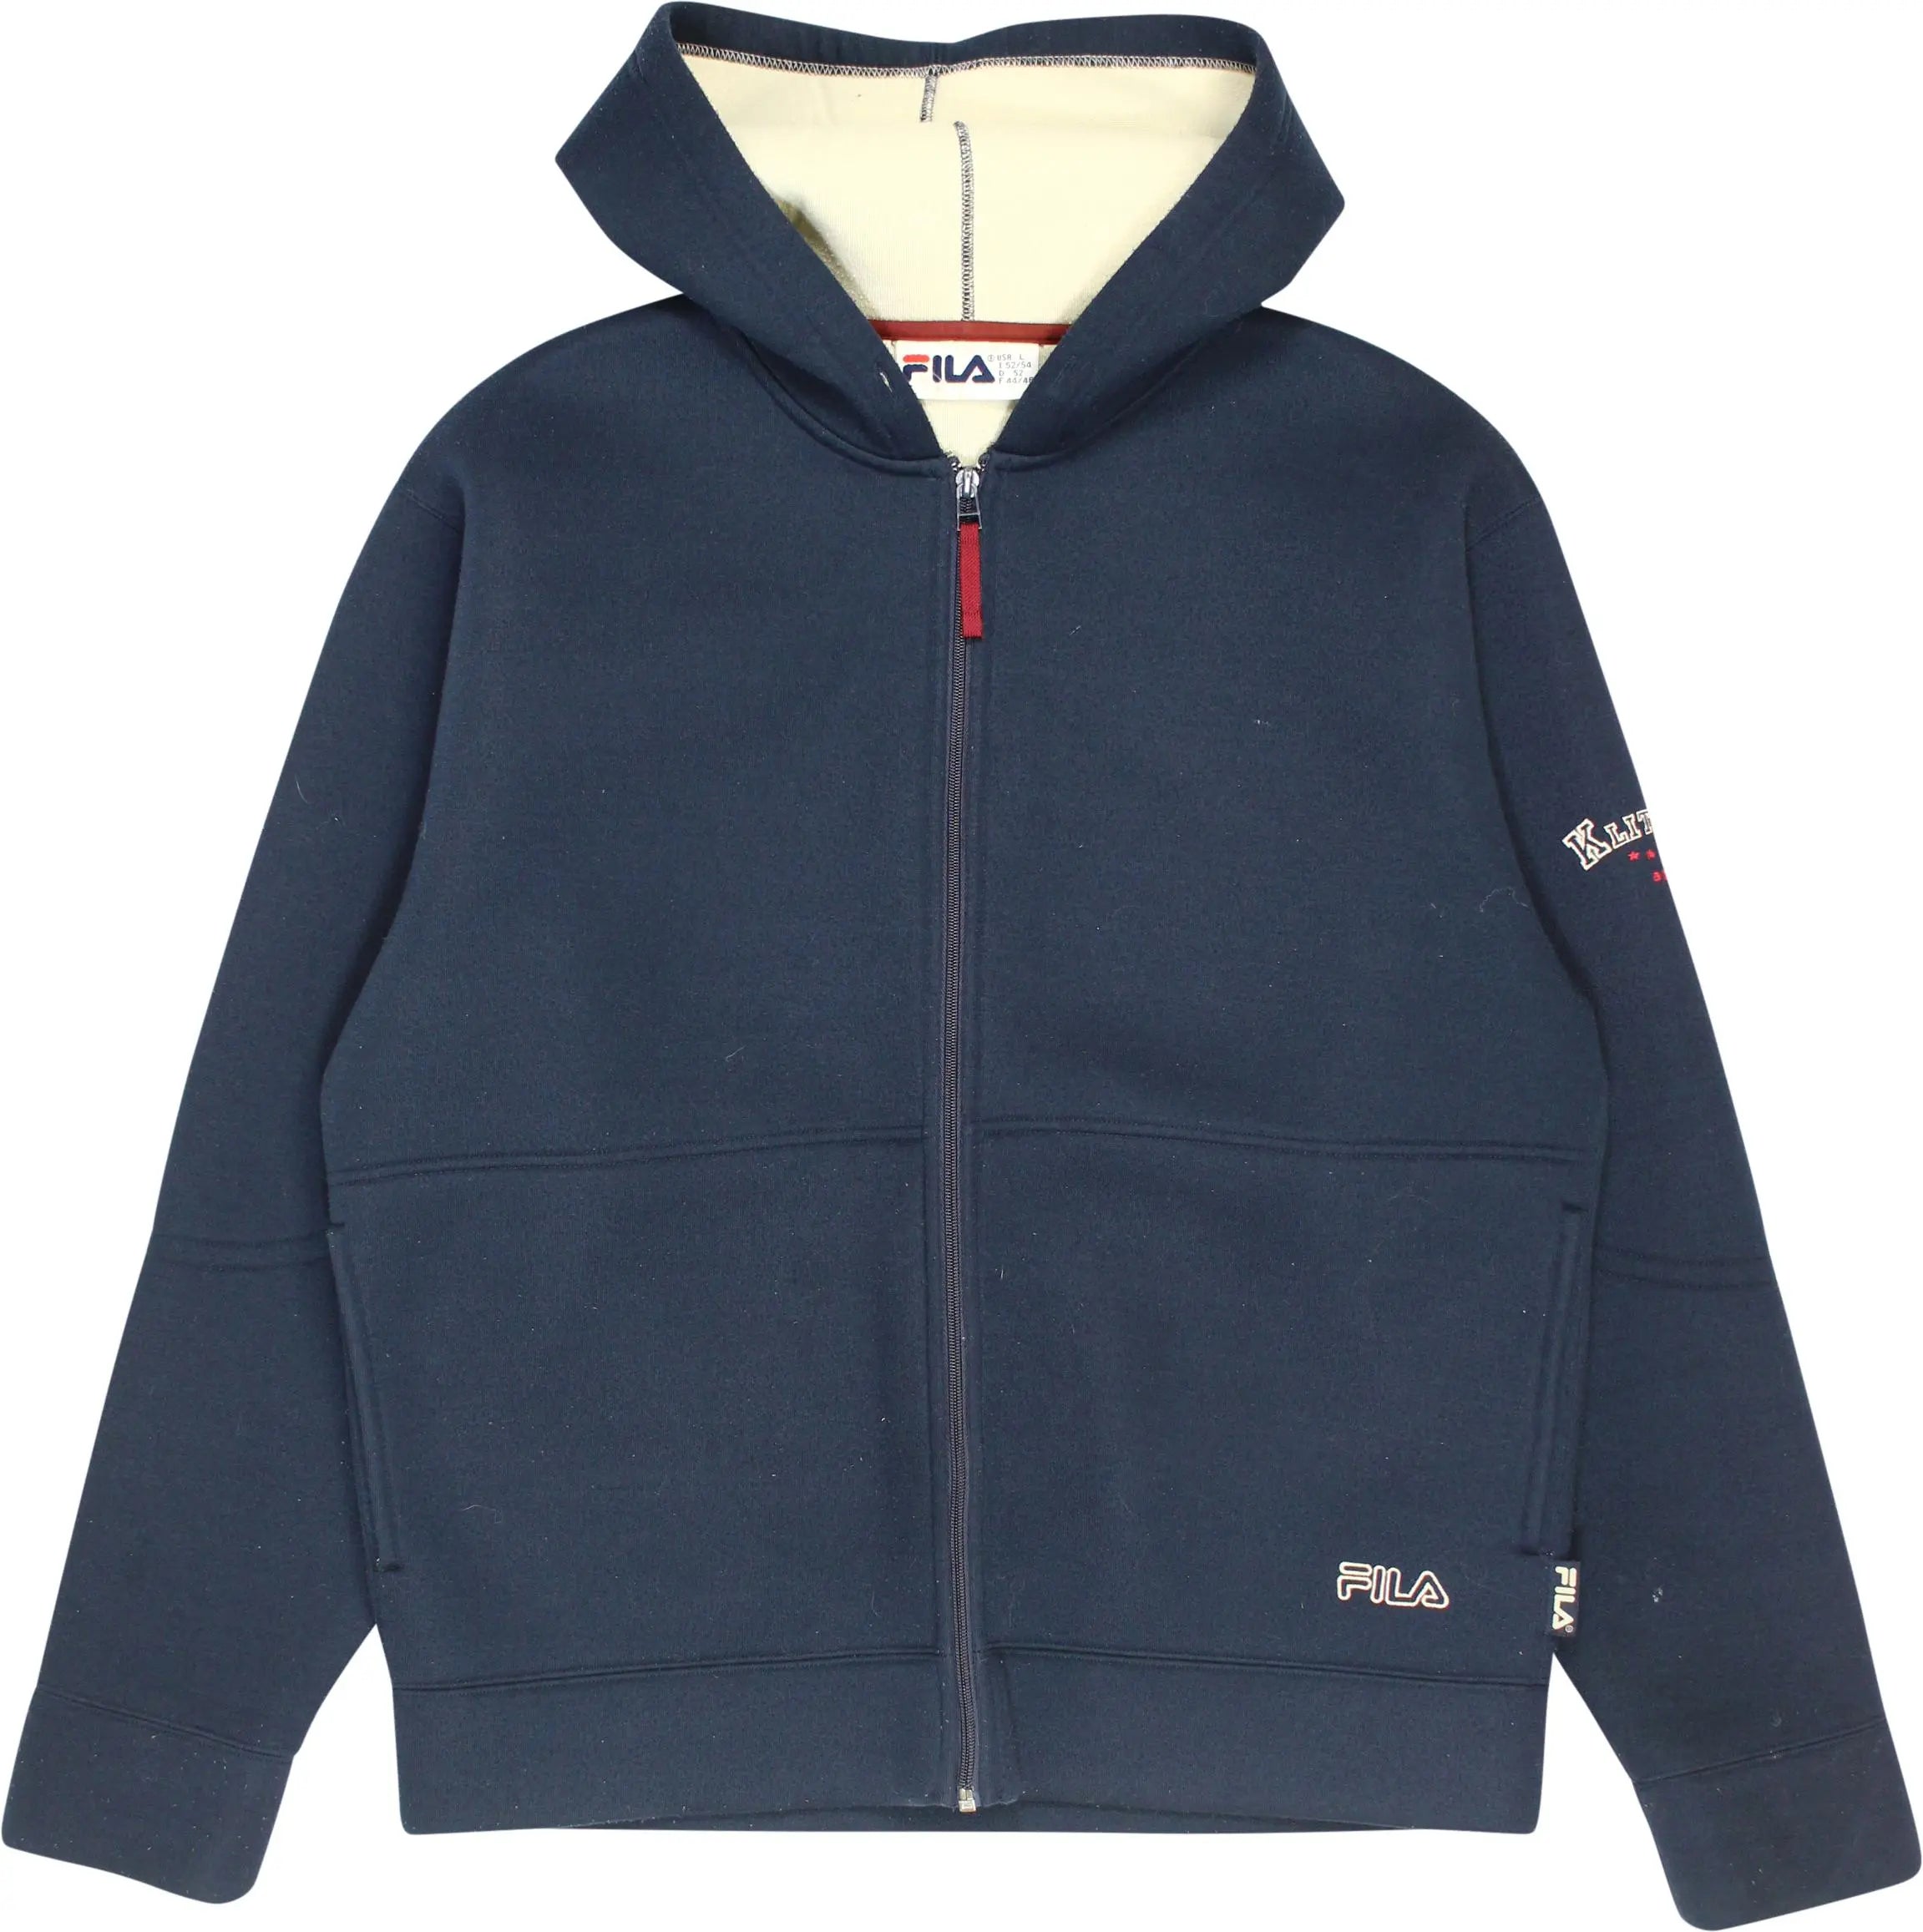 Fila - Blue Fleece Zip-up Hoodie by Fila- ThriftTale.com - Vintage and second handclothing